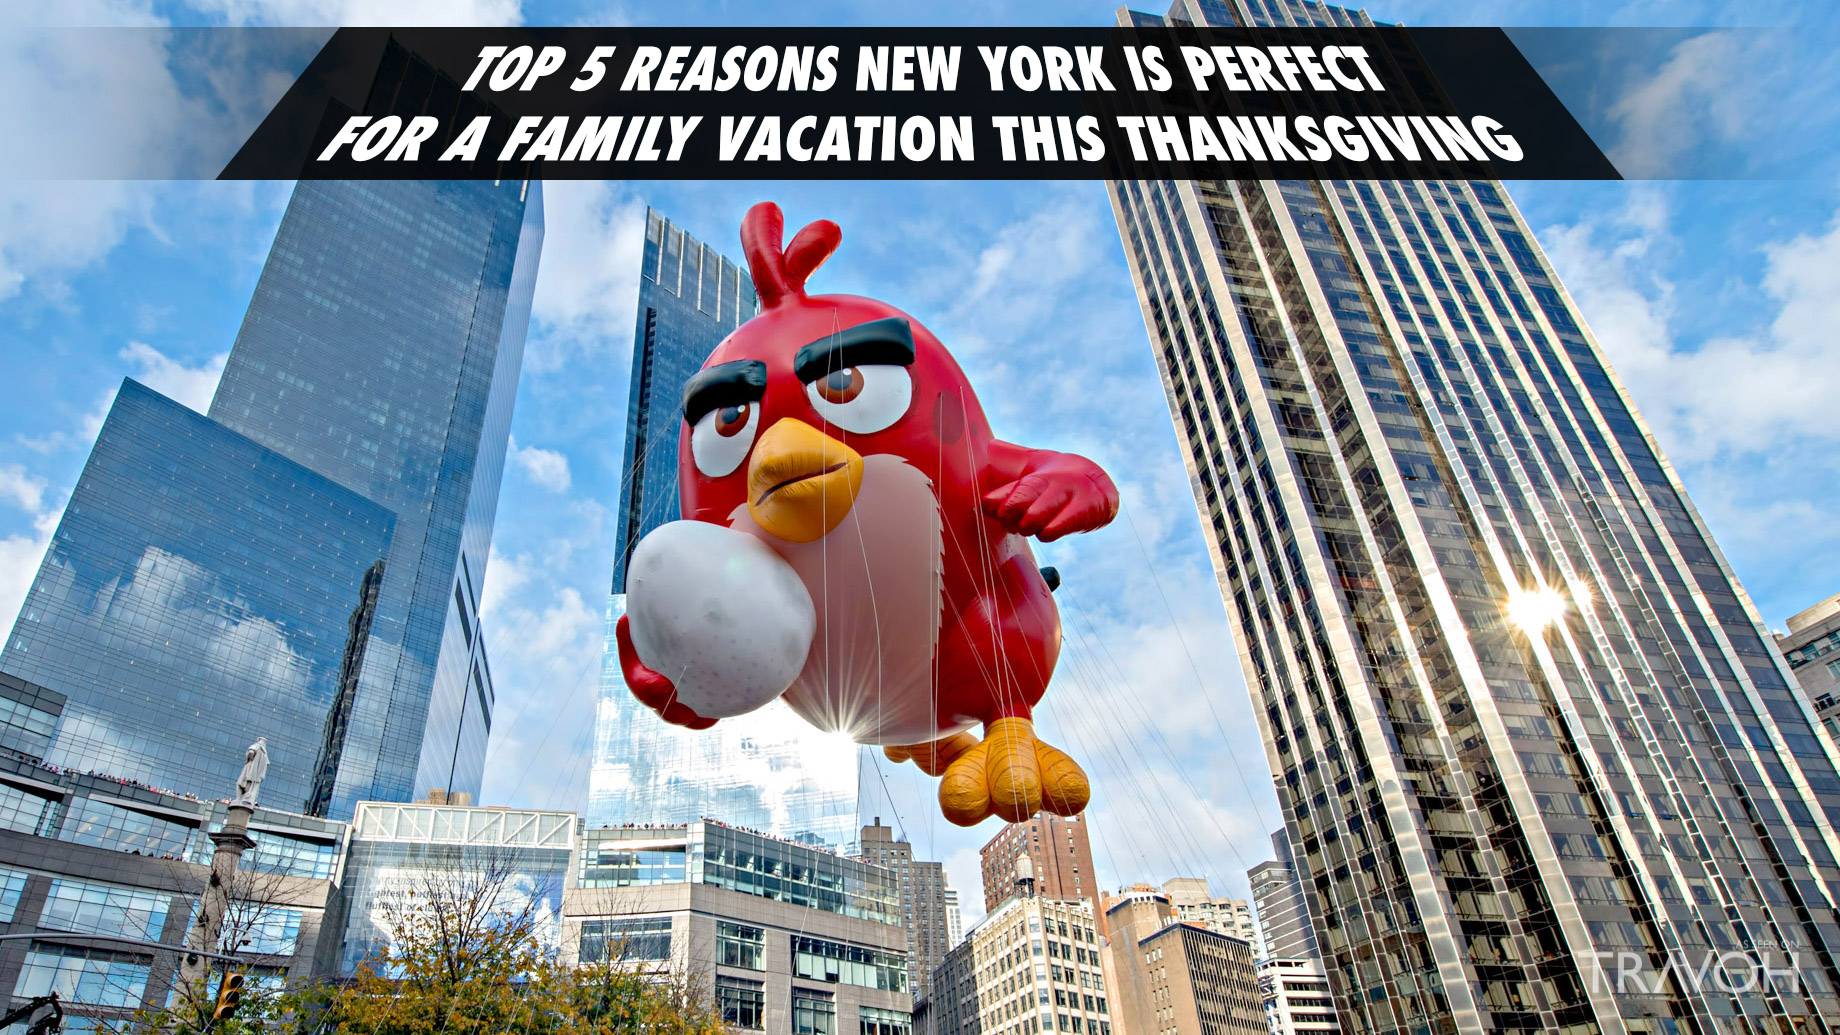 Top 5 Reasons New York is Perfect for a Family Vacation this Thanksgiving